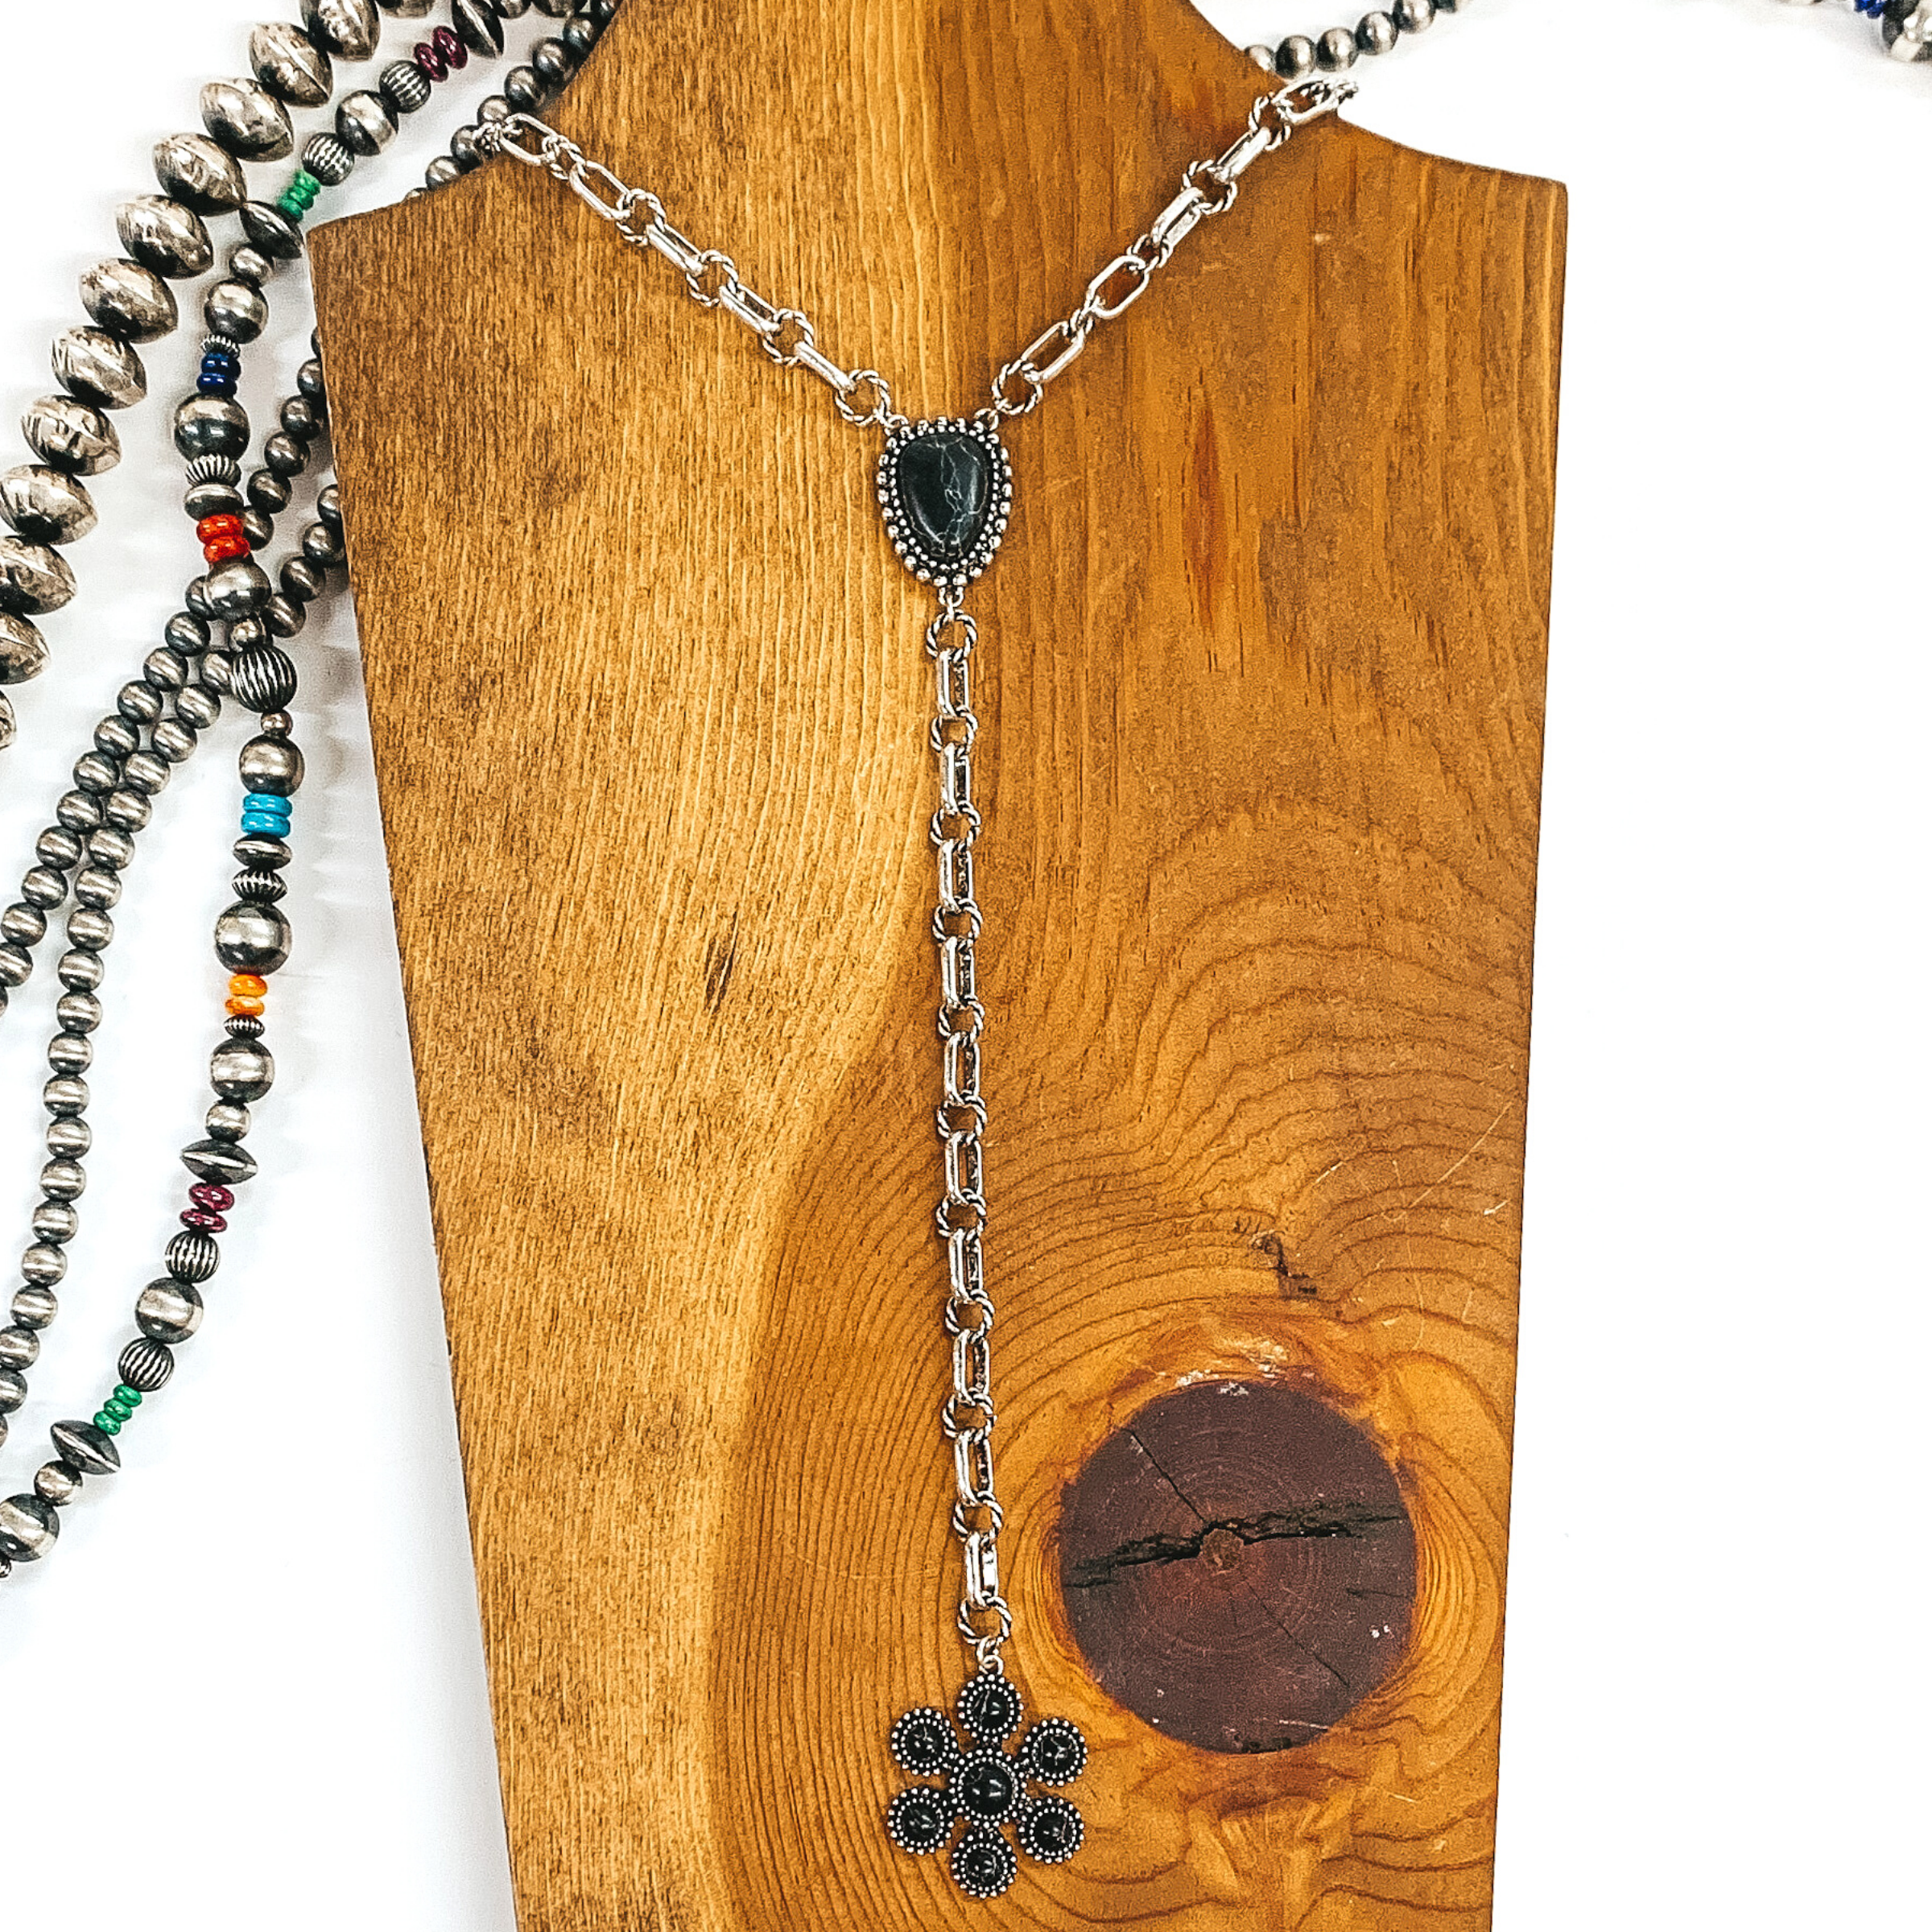 Silver chained necklace that is Navajo inspired with a black irregular stoned pendant. Then hanging from the pendant, there is a hanging silver chain with a star burst pendant with black stones. This necklace is pictured on  wood necklace holder on a white background. It has different shaped and colored Navajo strands. 